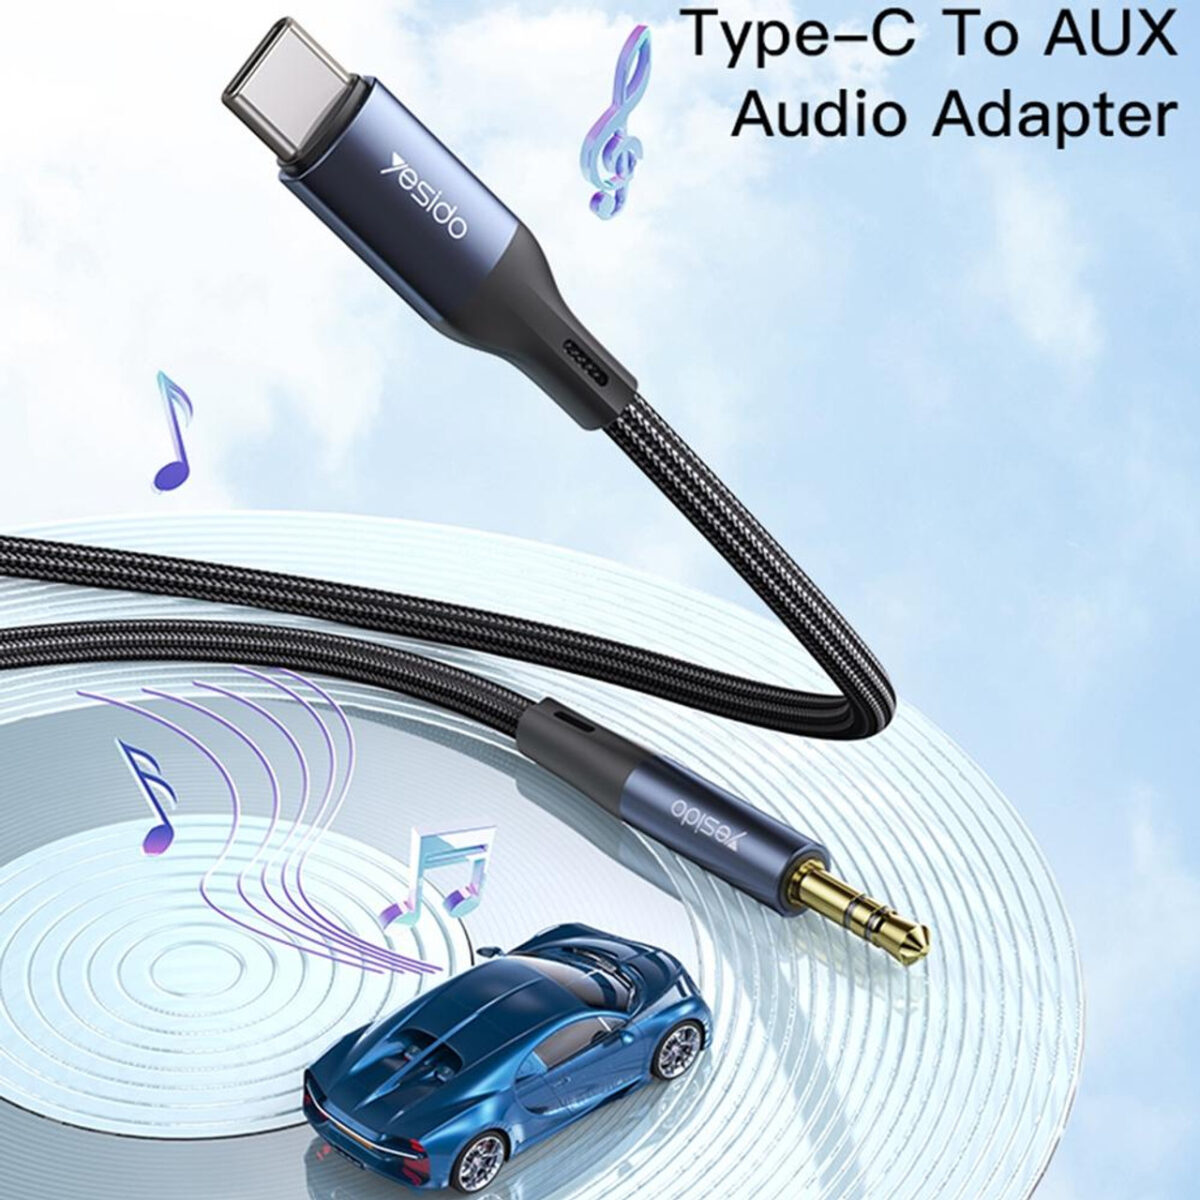 Yesido YAU36 Type-C to 3.5mm AUX Audio Adapter Cable (Black)